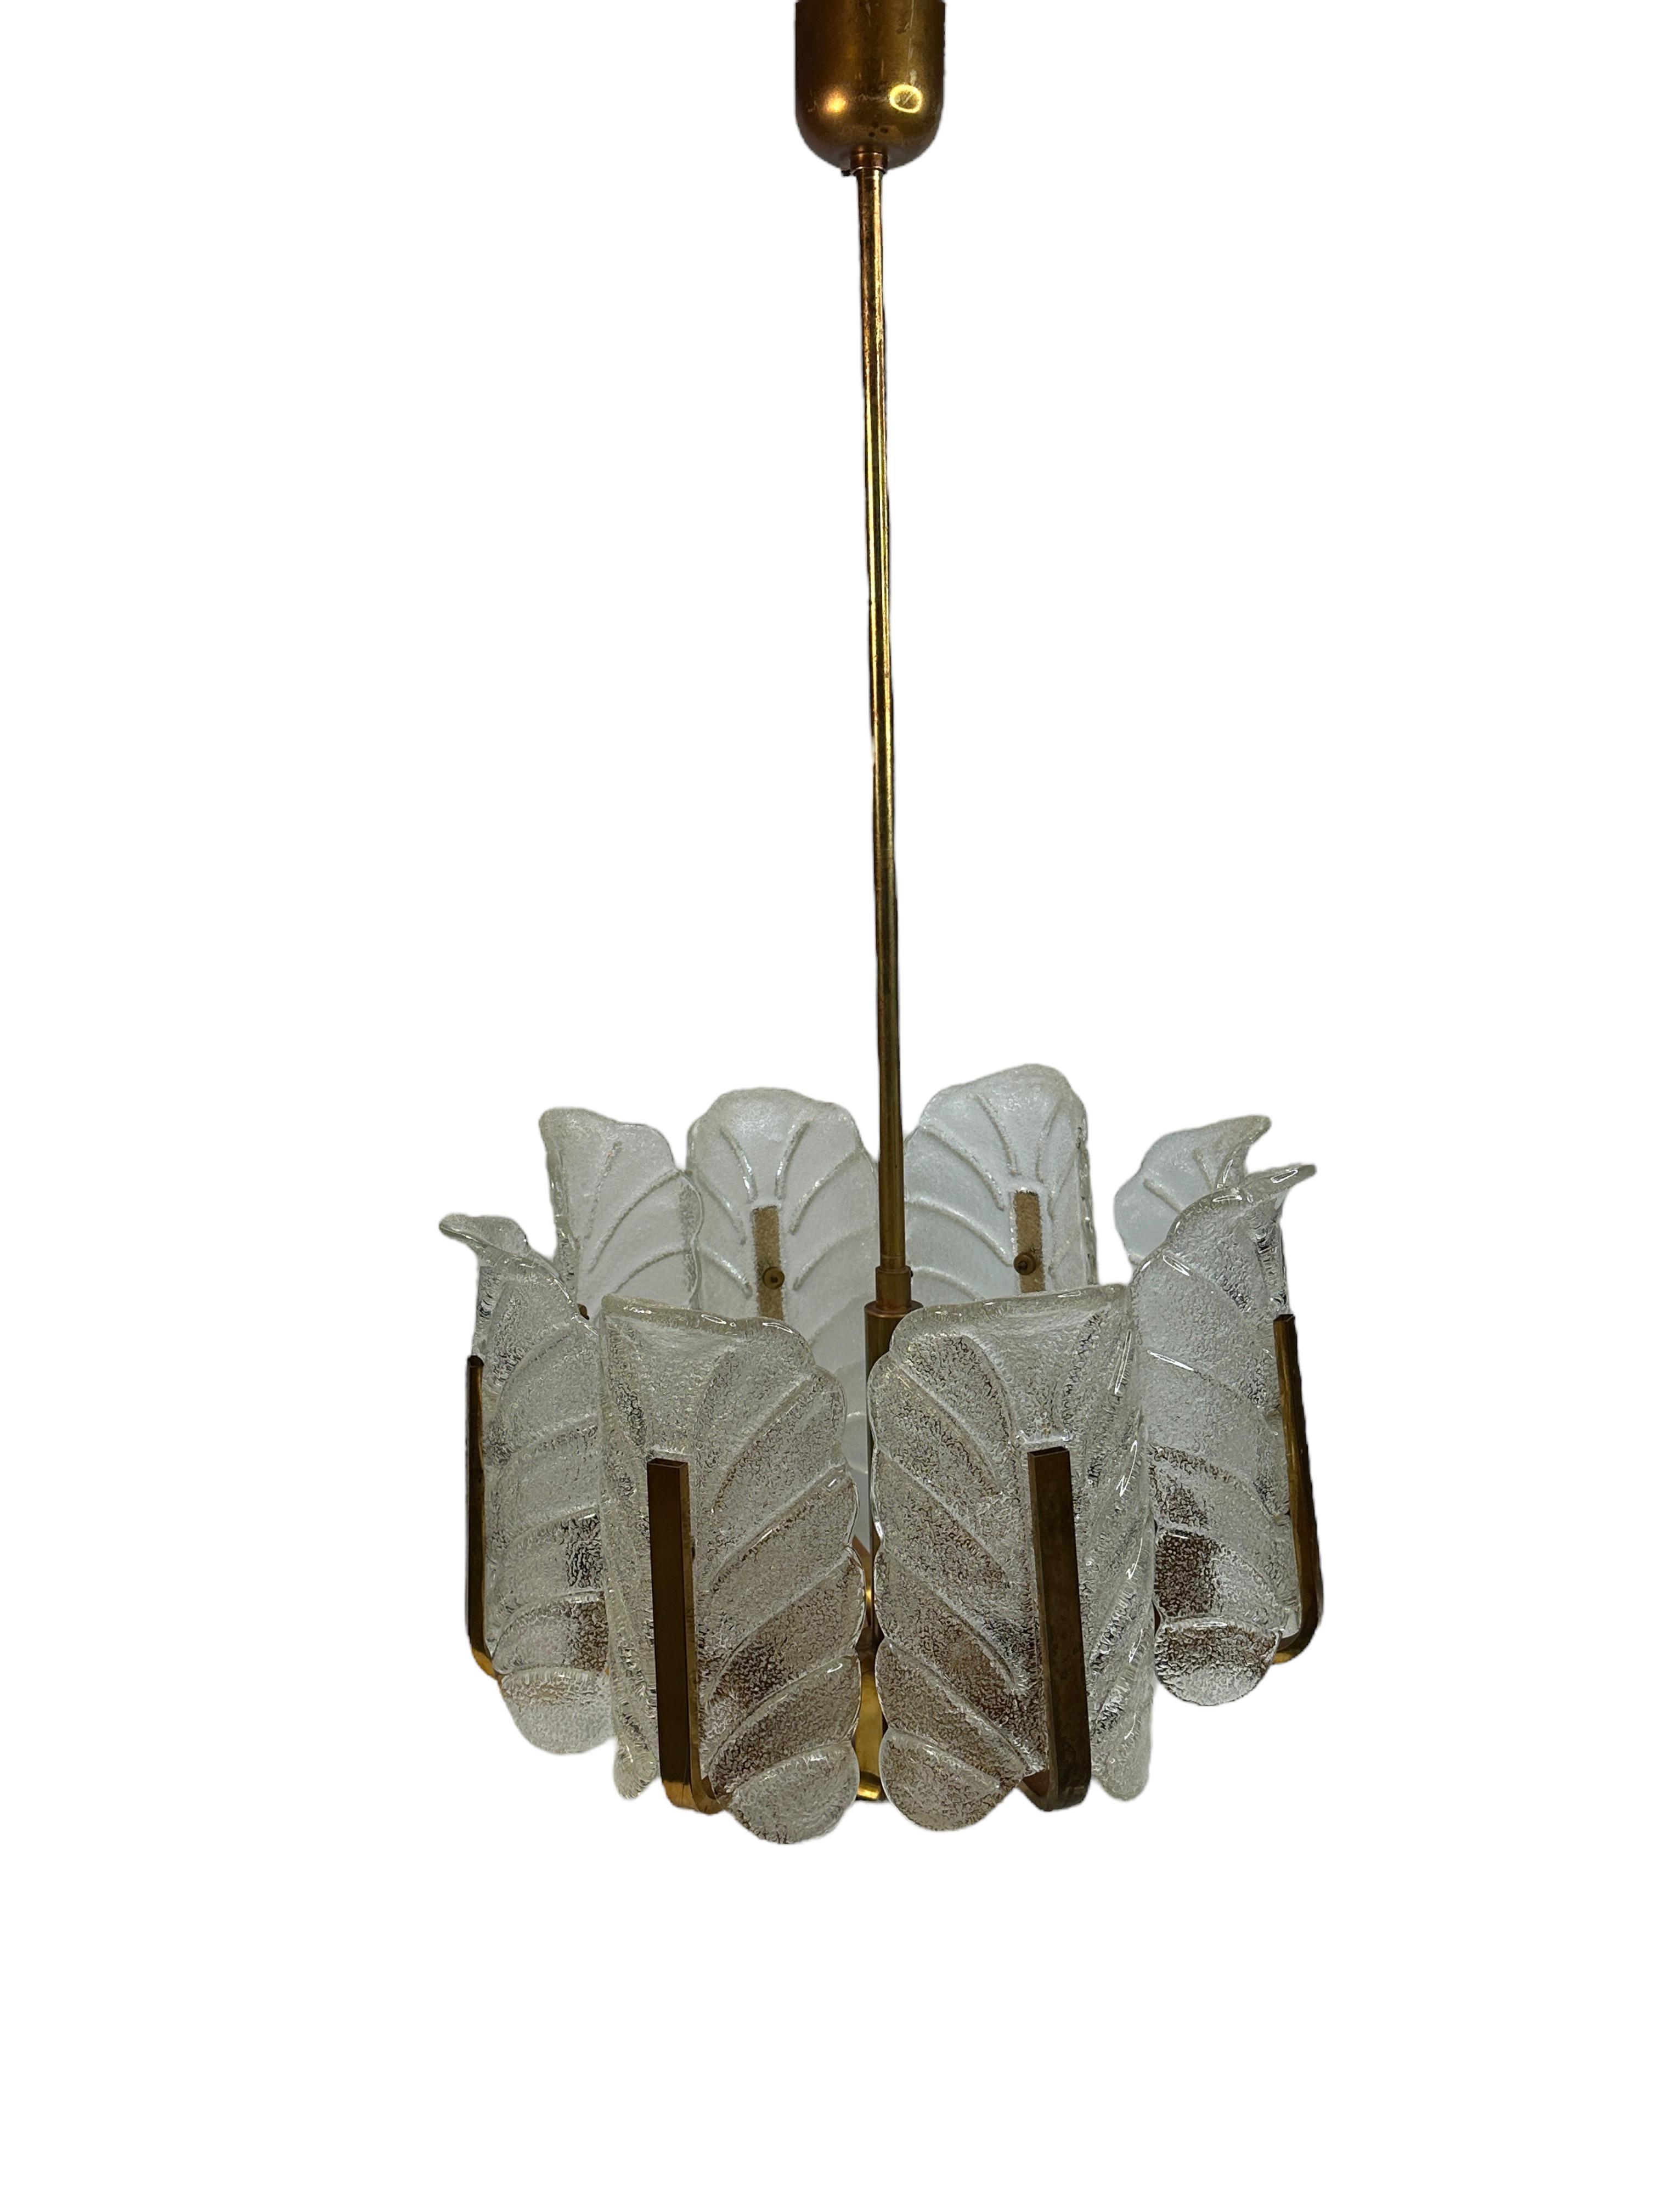 Large glass and brass chandelier by Carl Fagerlund for Orrefors. This large brass chandelier consists of 8 arms has 8 light sources. Each arm contains a Murano frosted glass acanthus leaf shade. Offered midcentury chandelier has original wire and